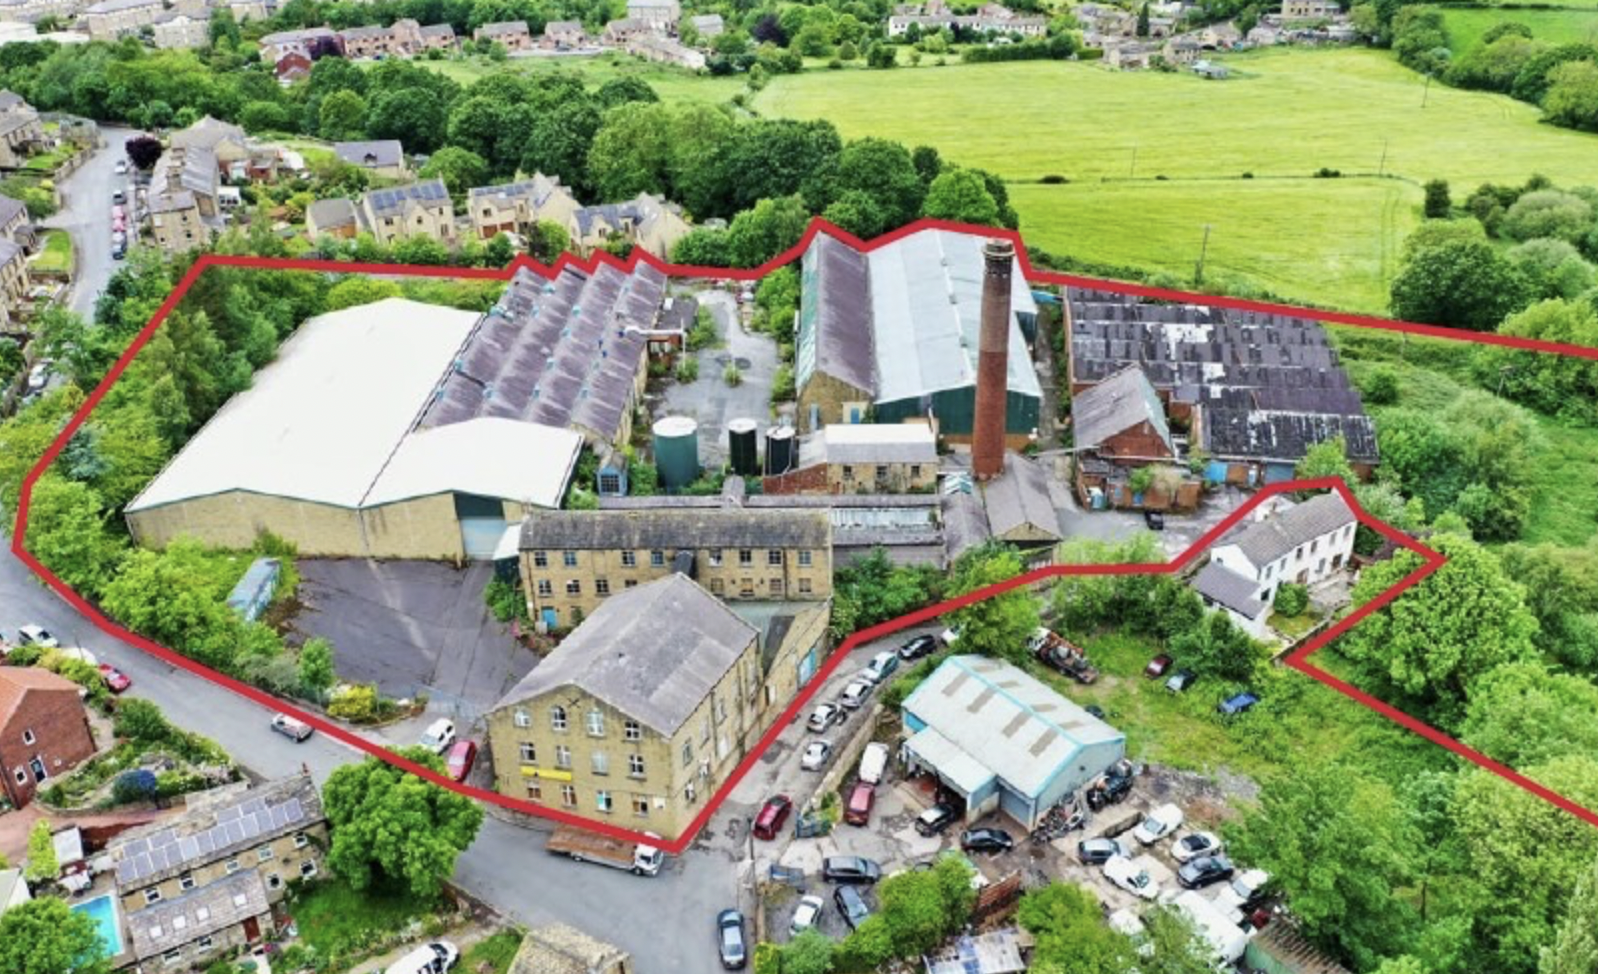 Residential development for challenging brownfield site